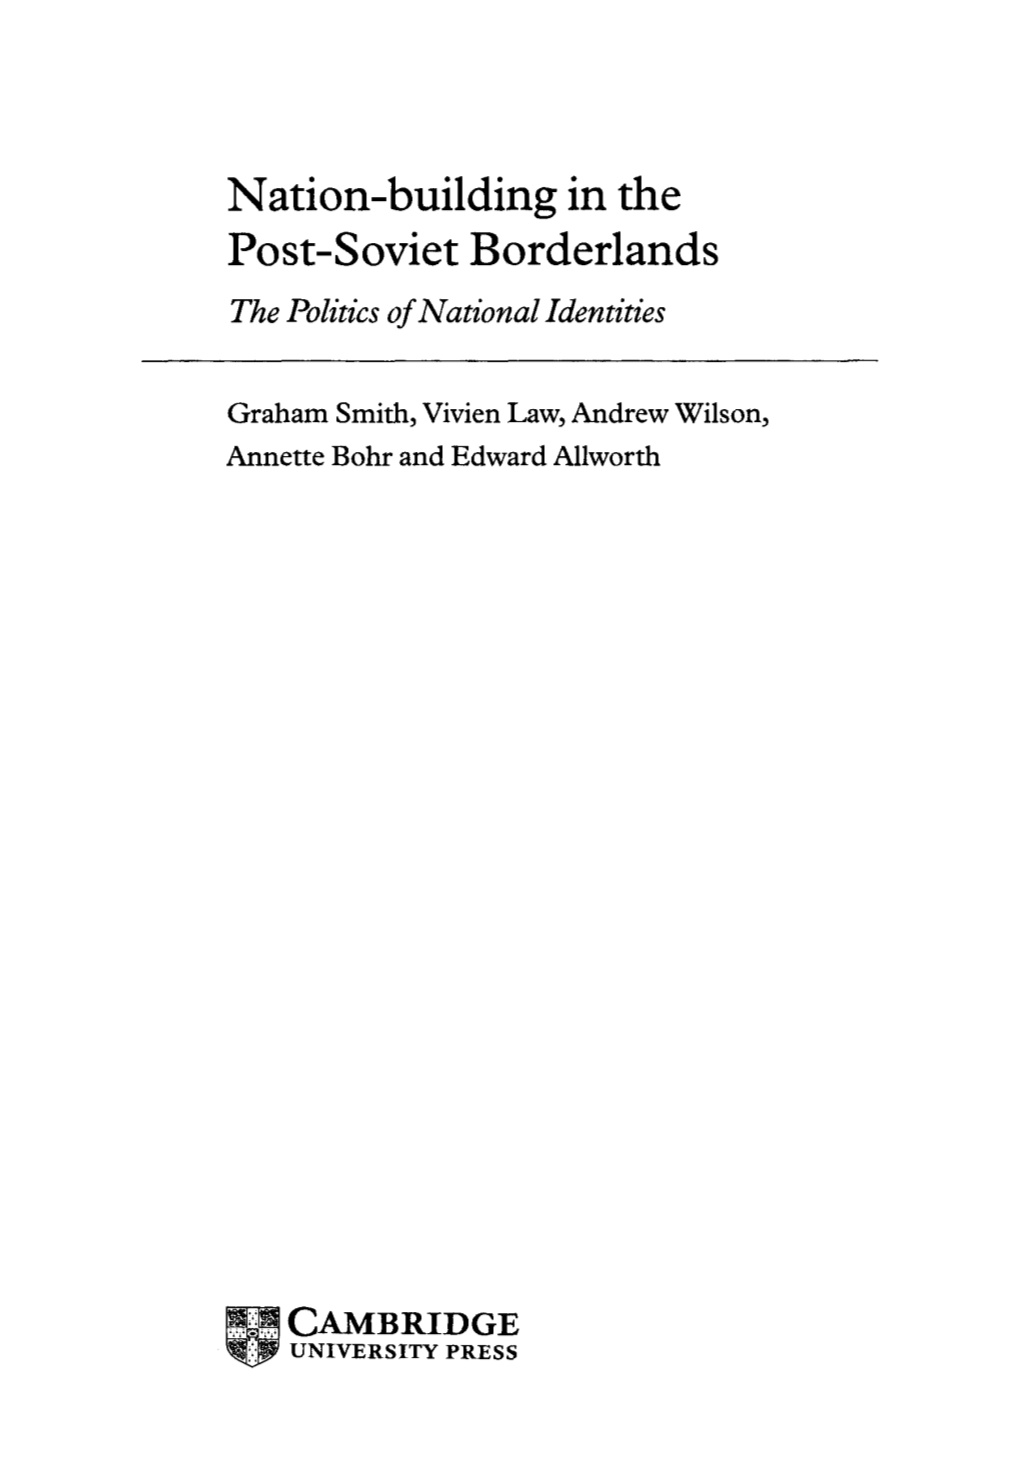 Nation-Building in the Post-Soviet Borderlands the Politics of National Identities